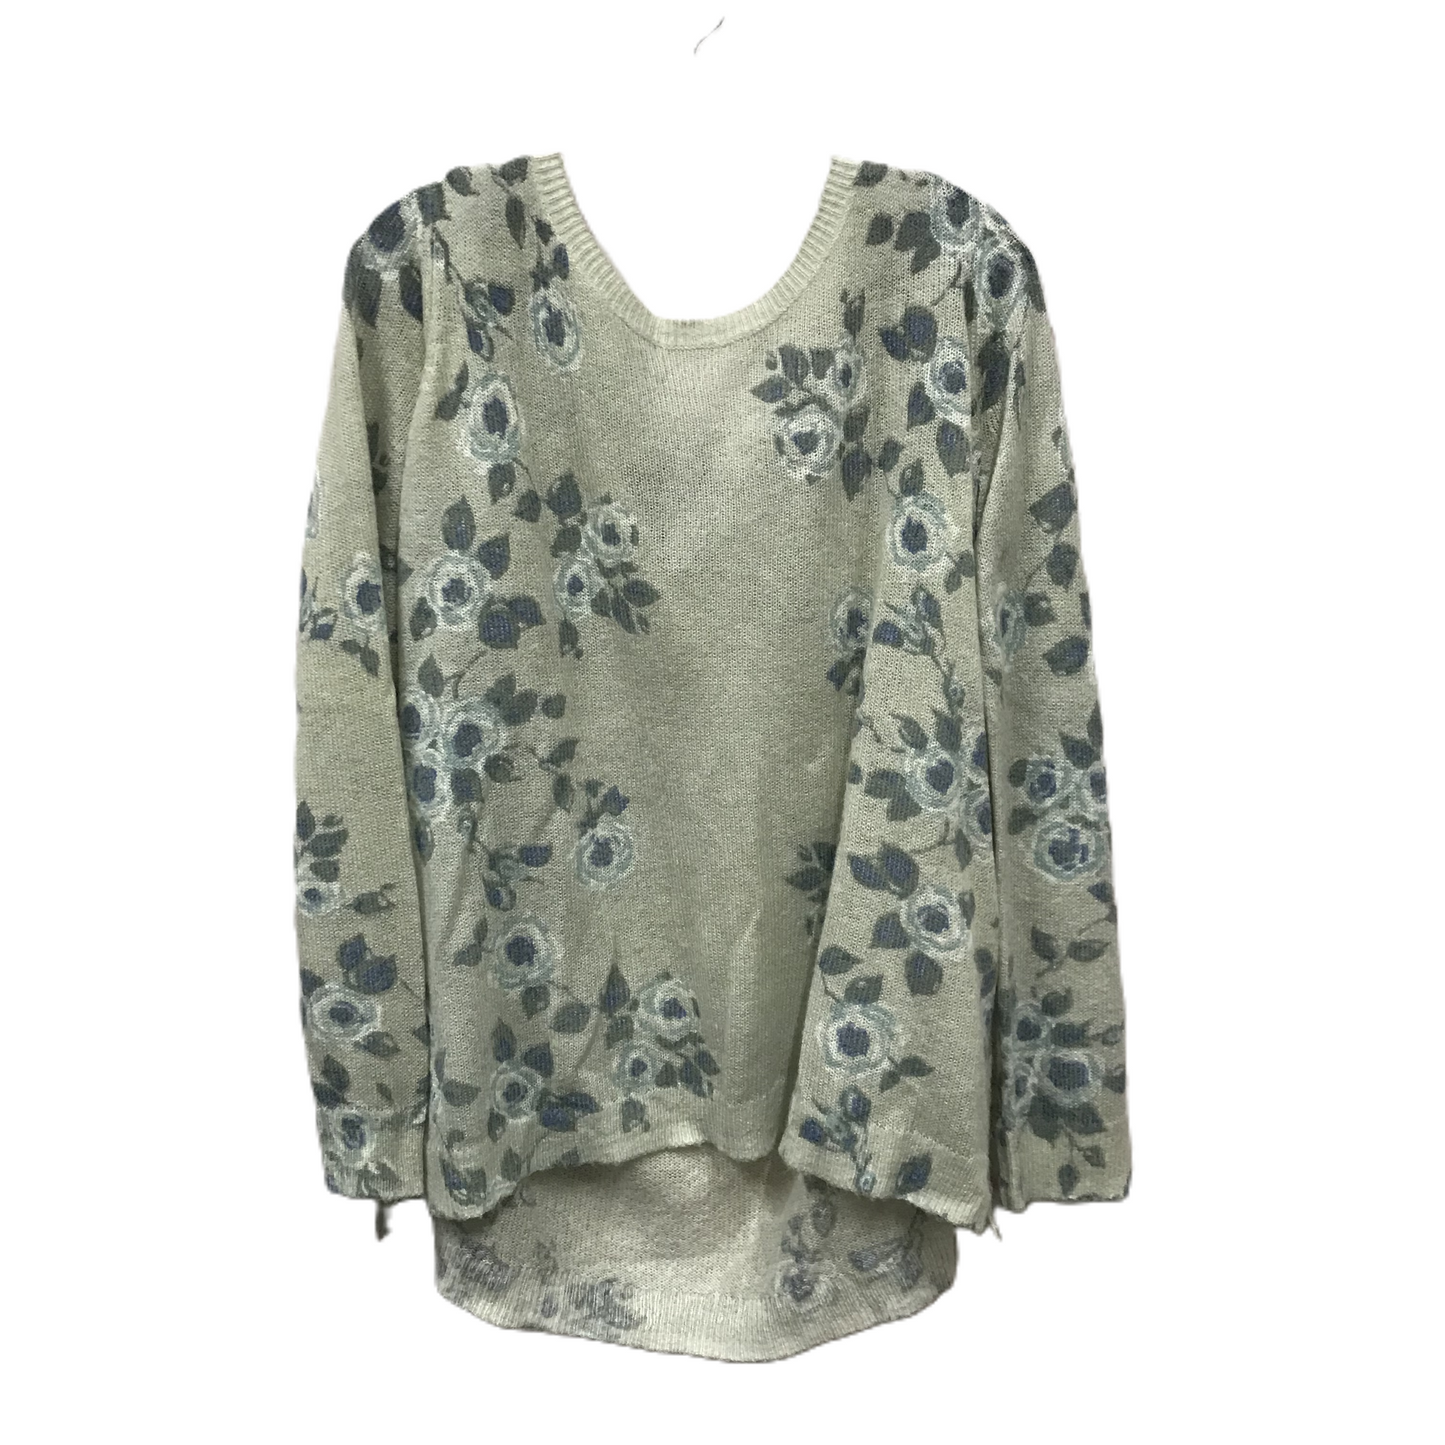 Grey Sweater By Lc Lauren Conrad, Size: 1x